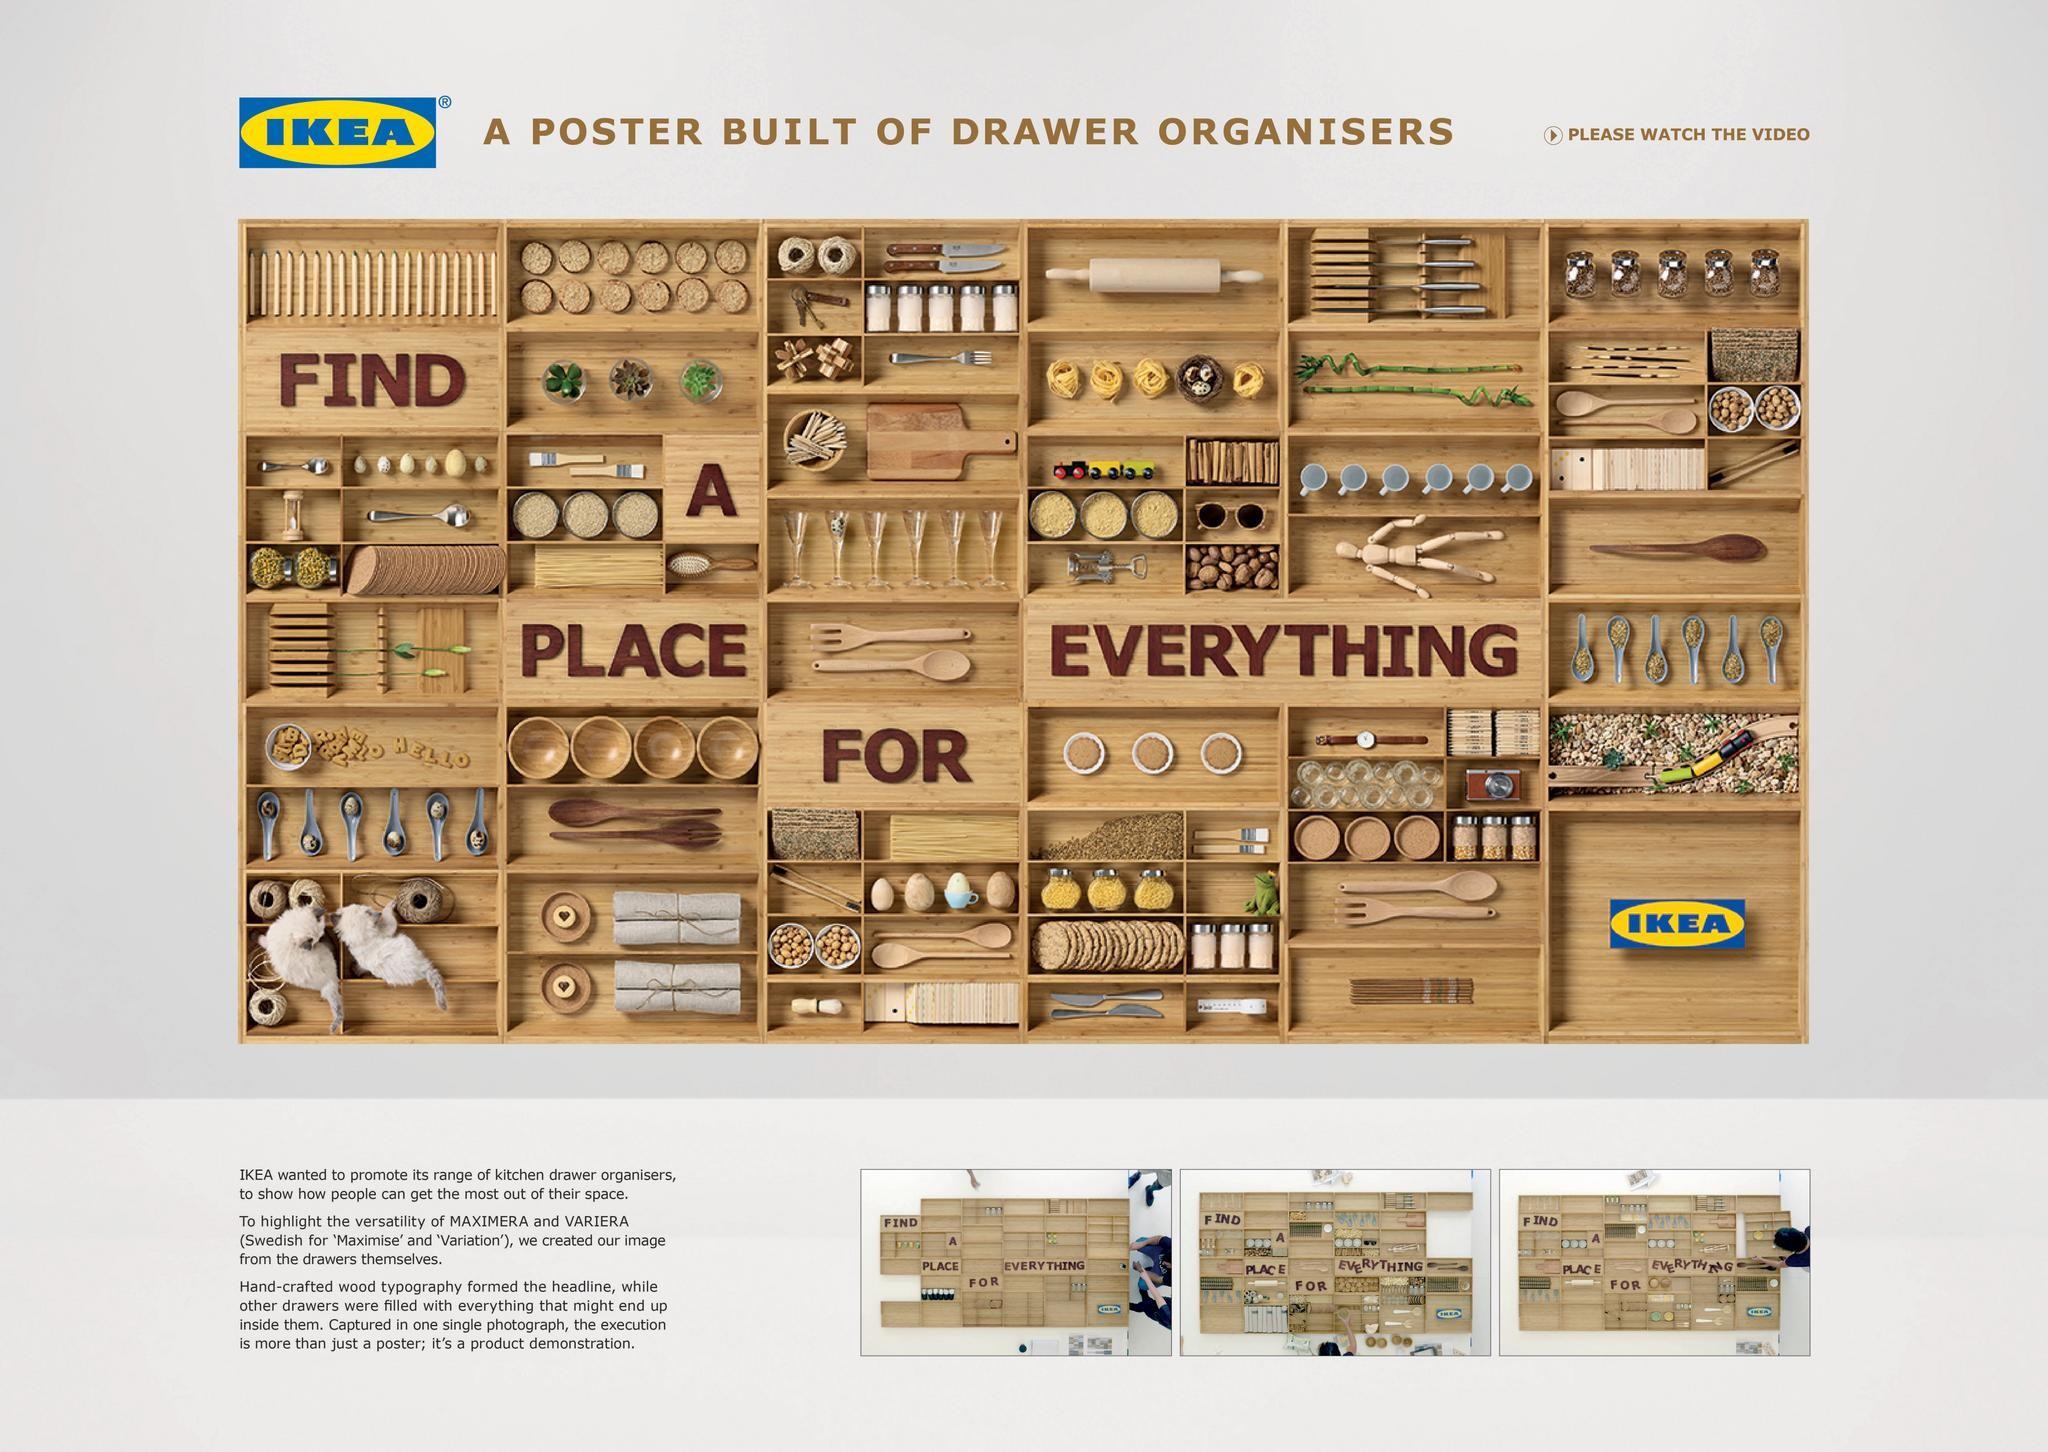 IKEA - A Poster Made of Drawers